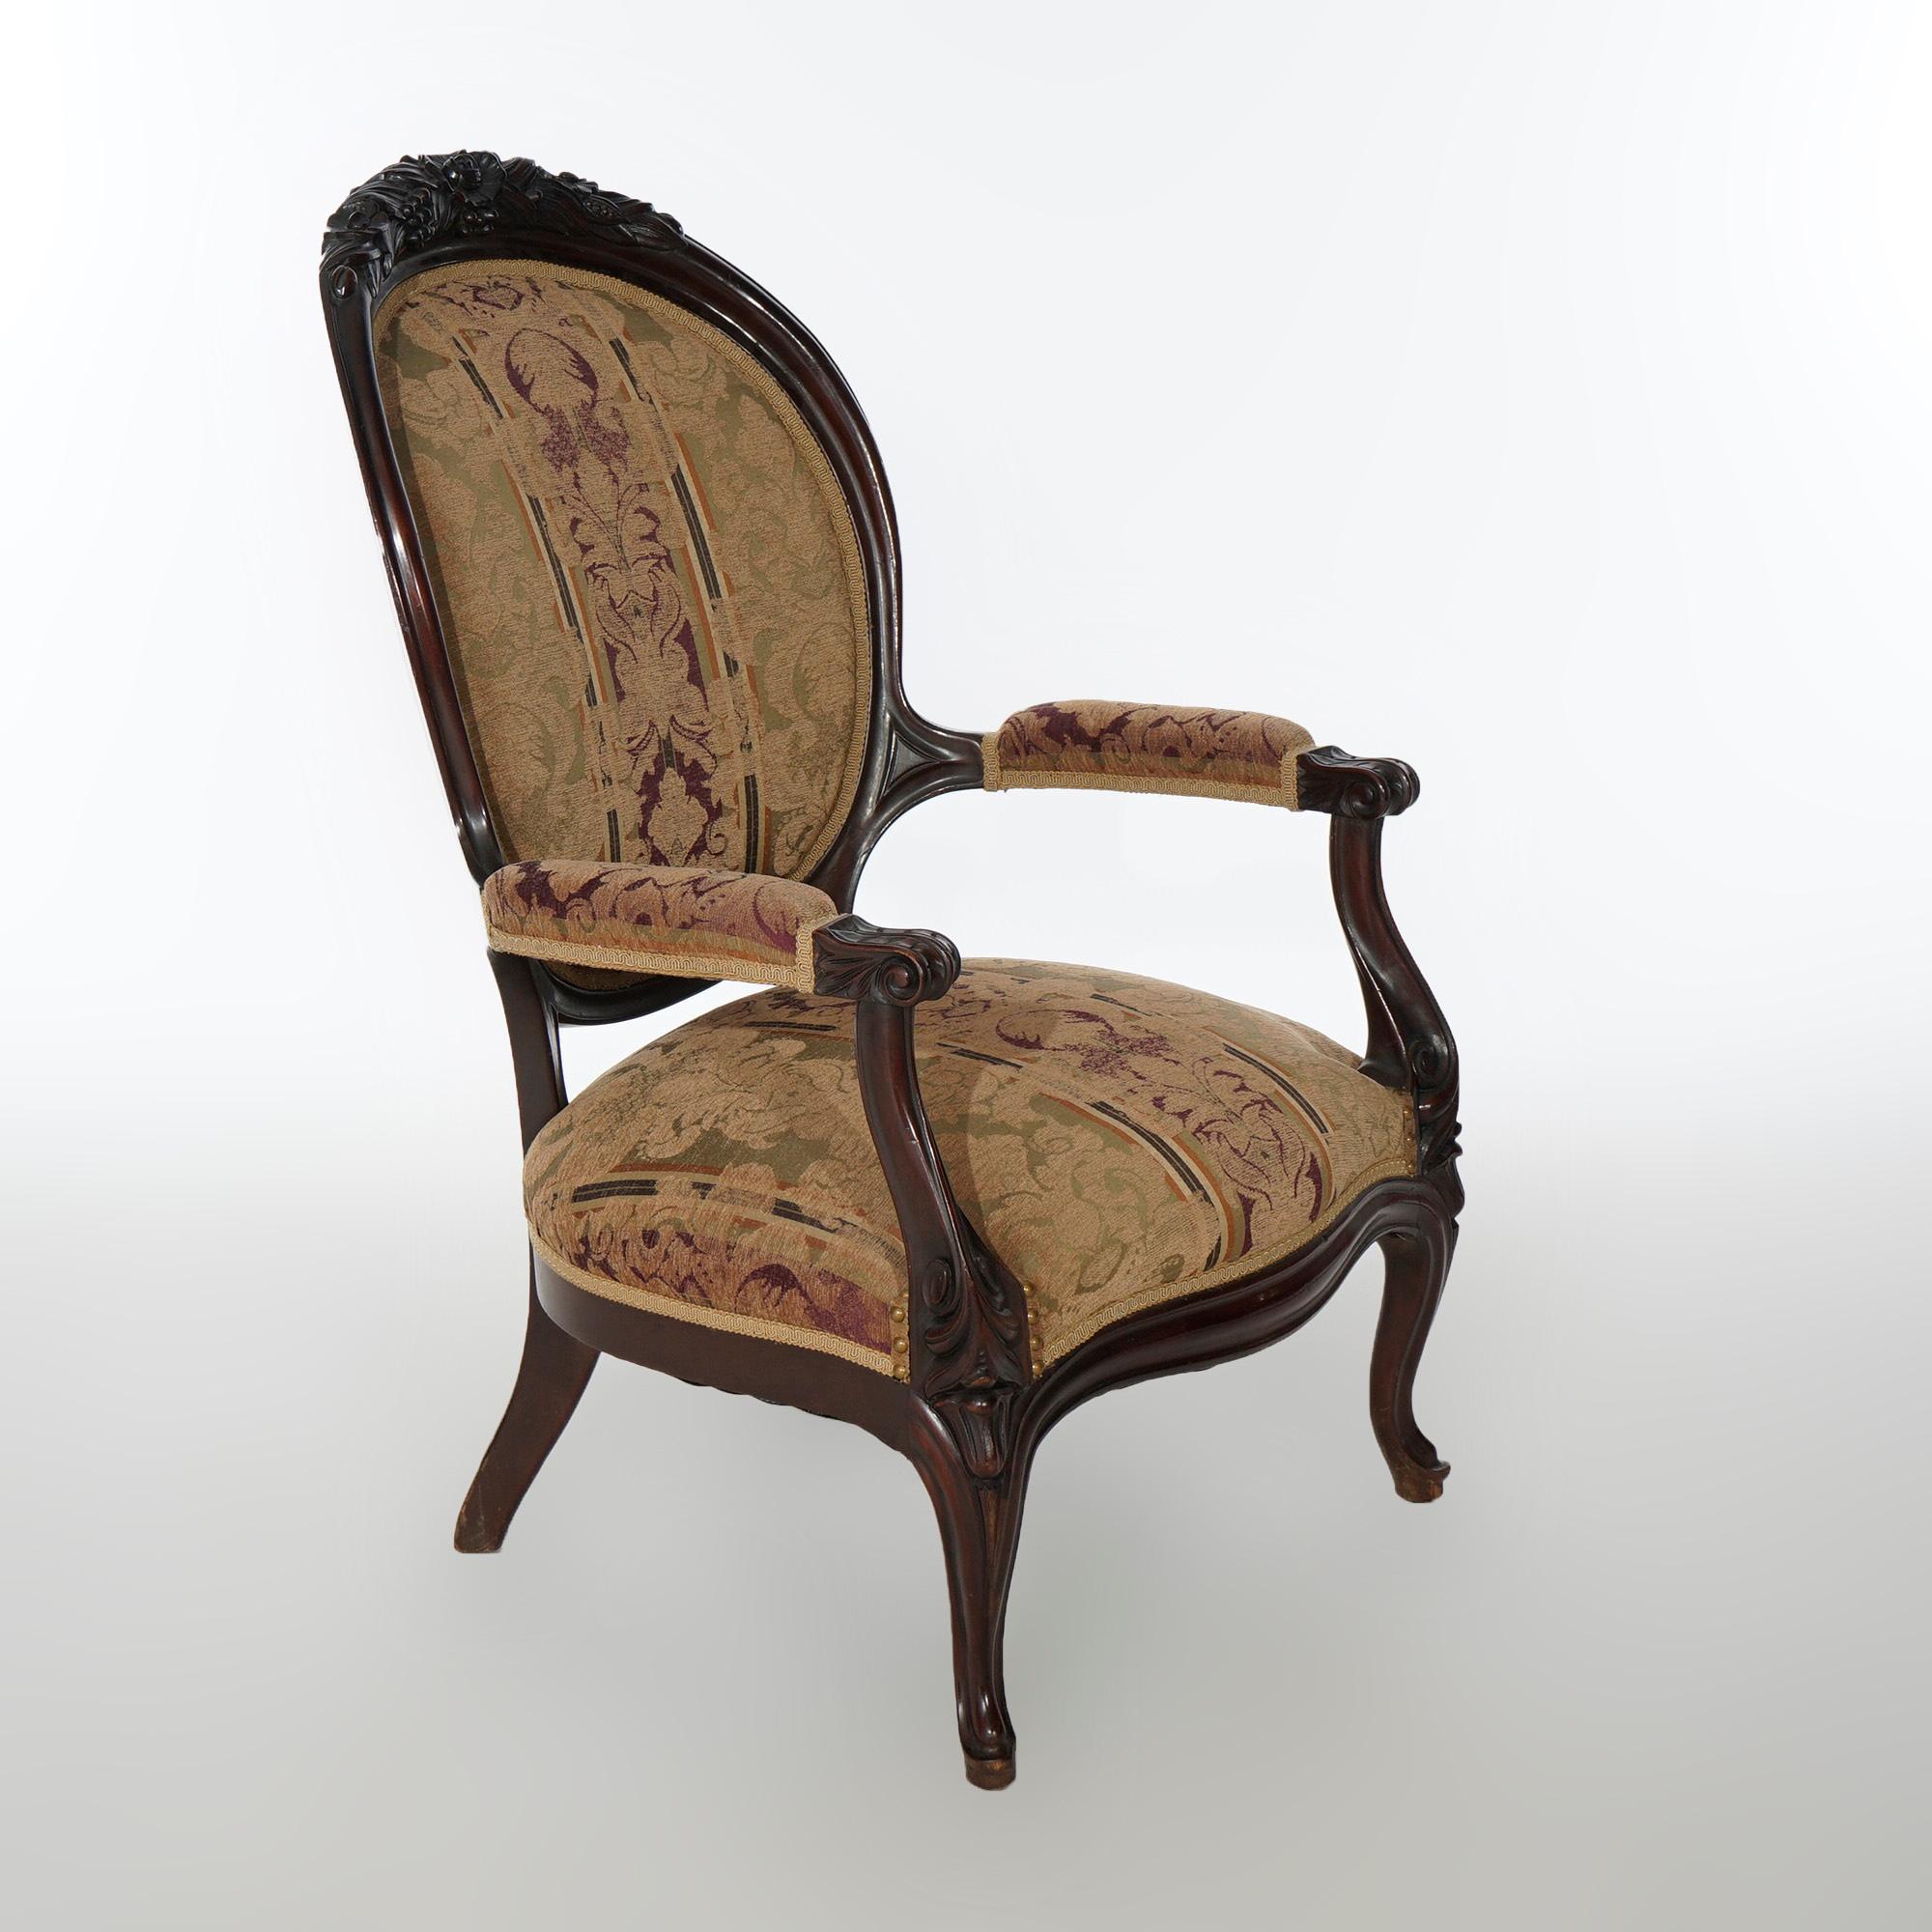 An antique Victorian parlor arm chair offers walnut frame with foliate carved crest over upholstered medallion form back and seat, scroll form arms and raised on cabriole legs, c1890

Measures- 40.5''H x 26.75''W x 30''D; 15'' seat height